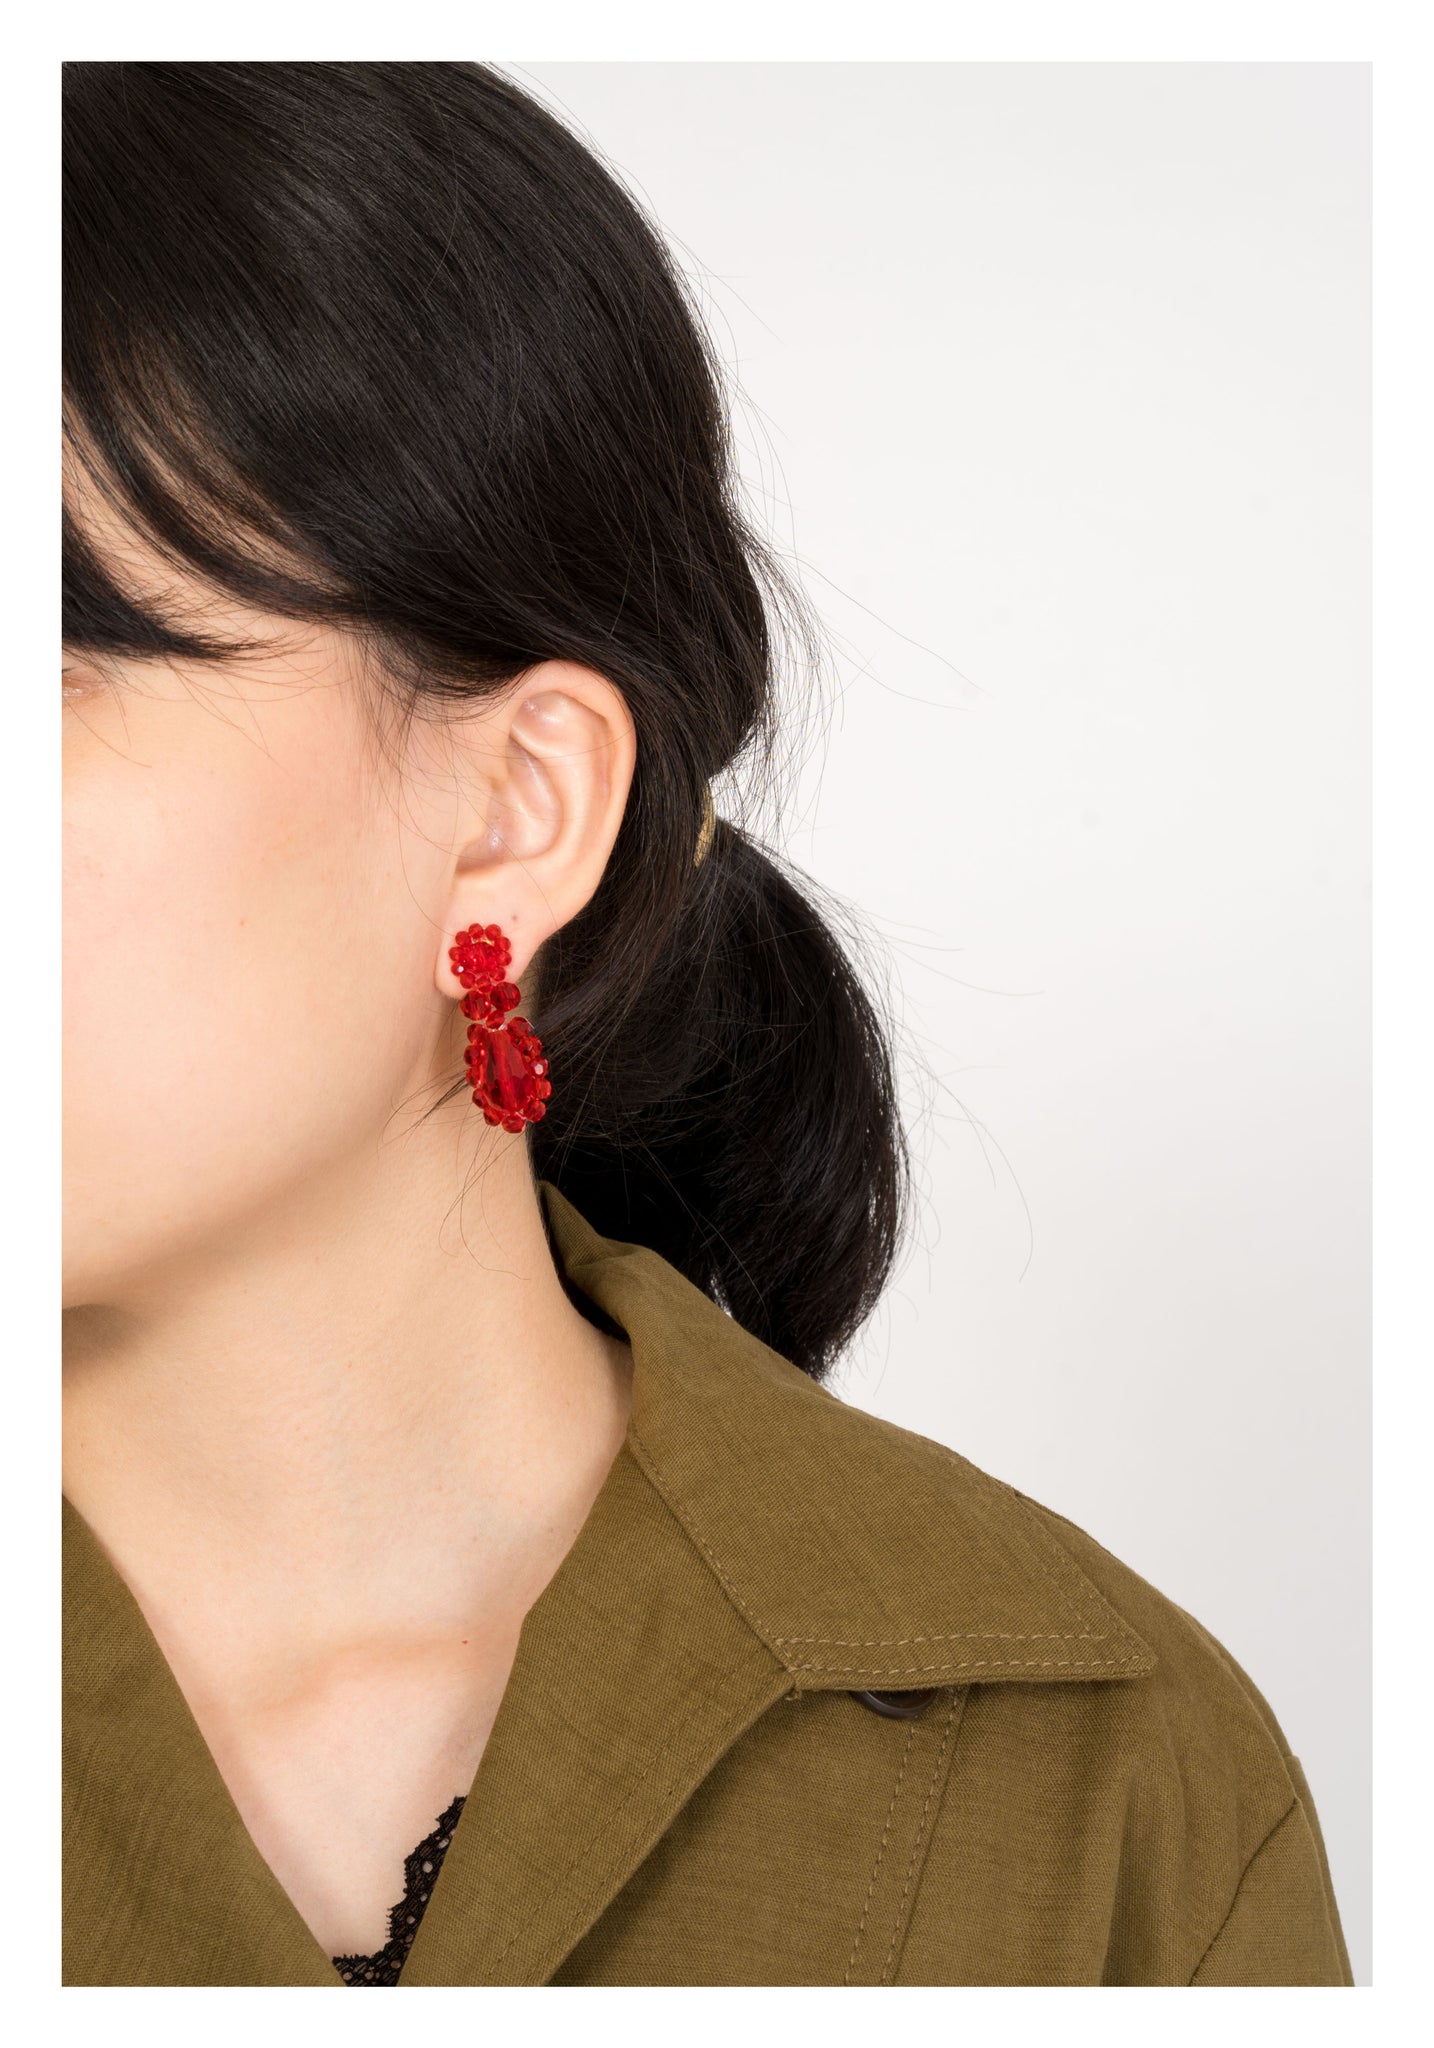 Playful Sparkle Gem Earrings Red - whoami